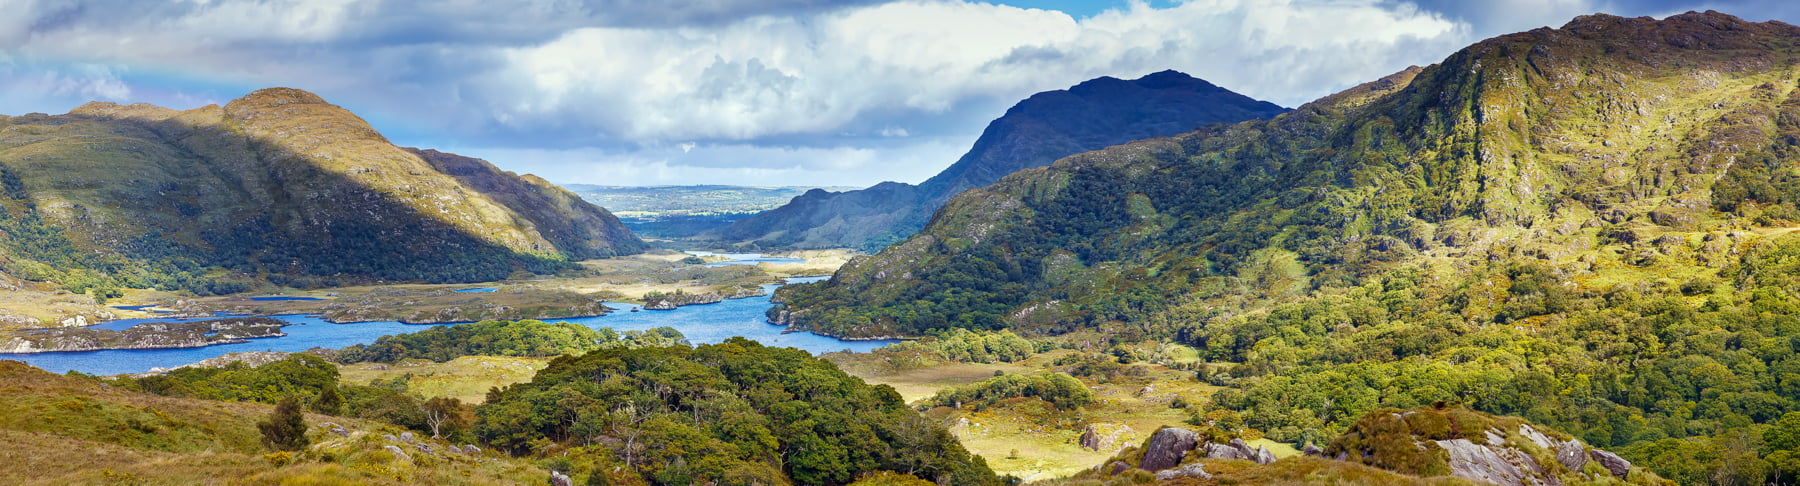 Ring of Kerry: Full-Day Tour from Killarney | GetYourGuide